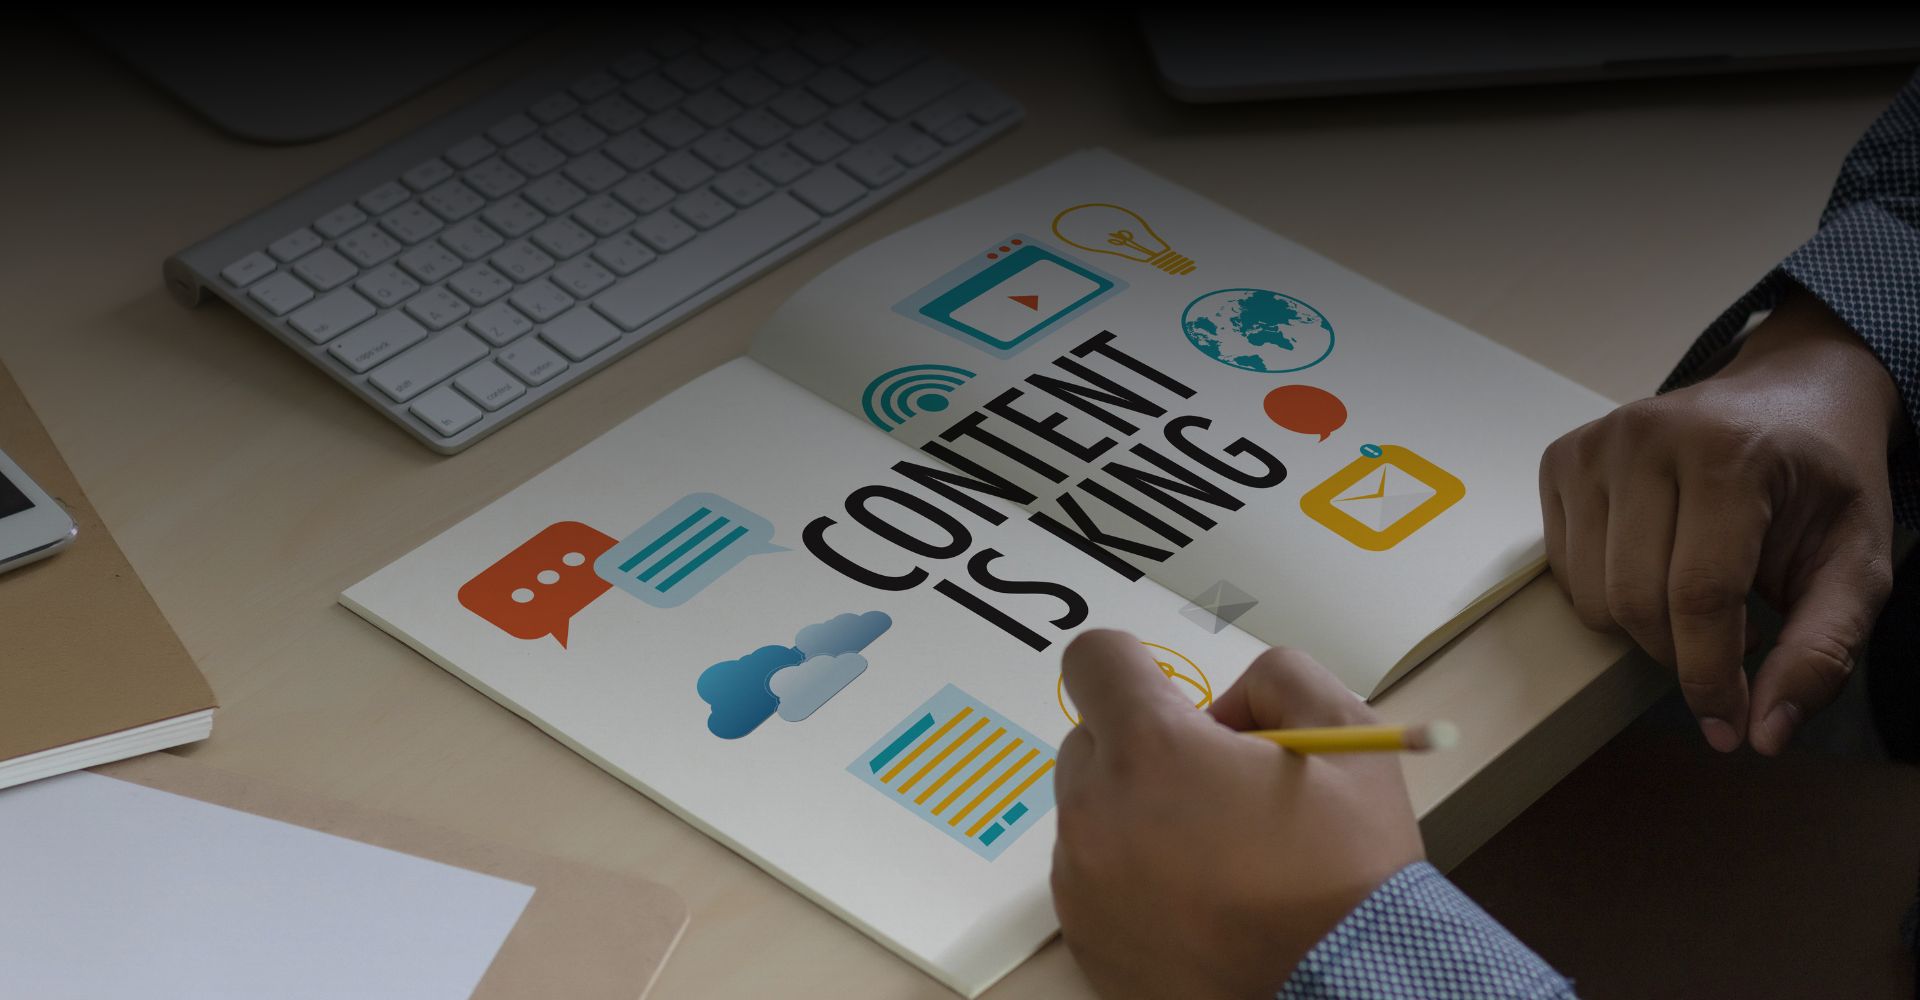 4 Tips for Creating Compelling Local Content For Your Business